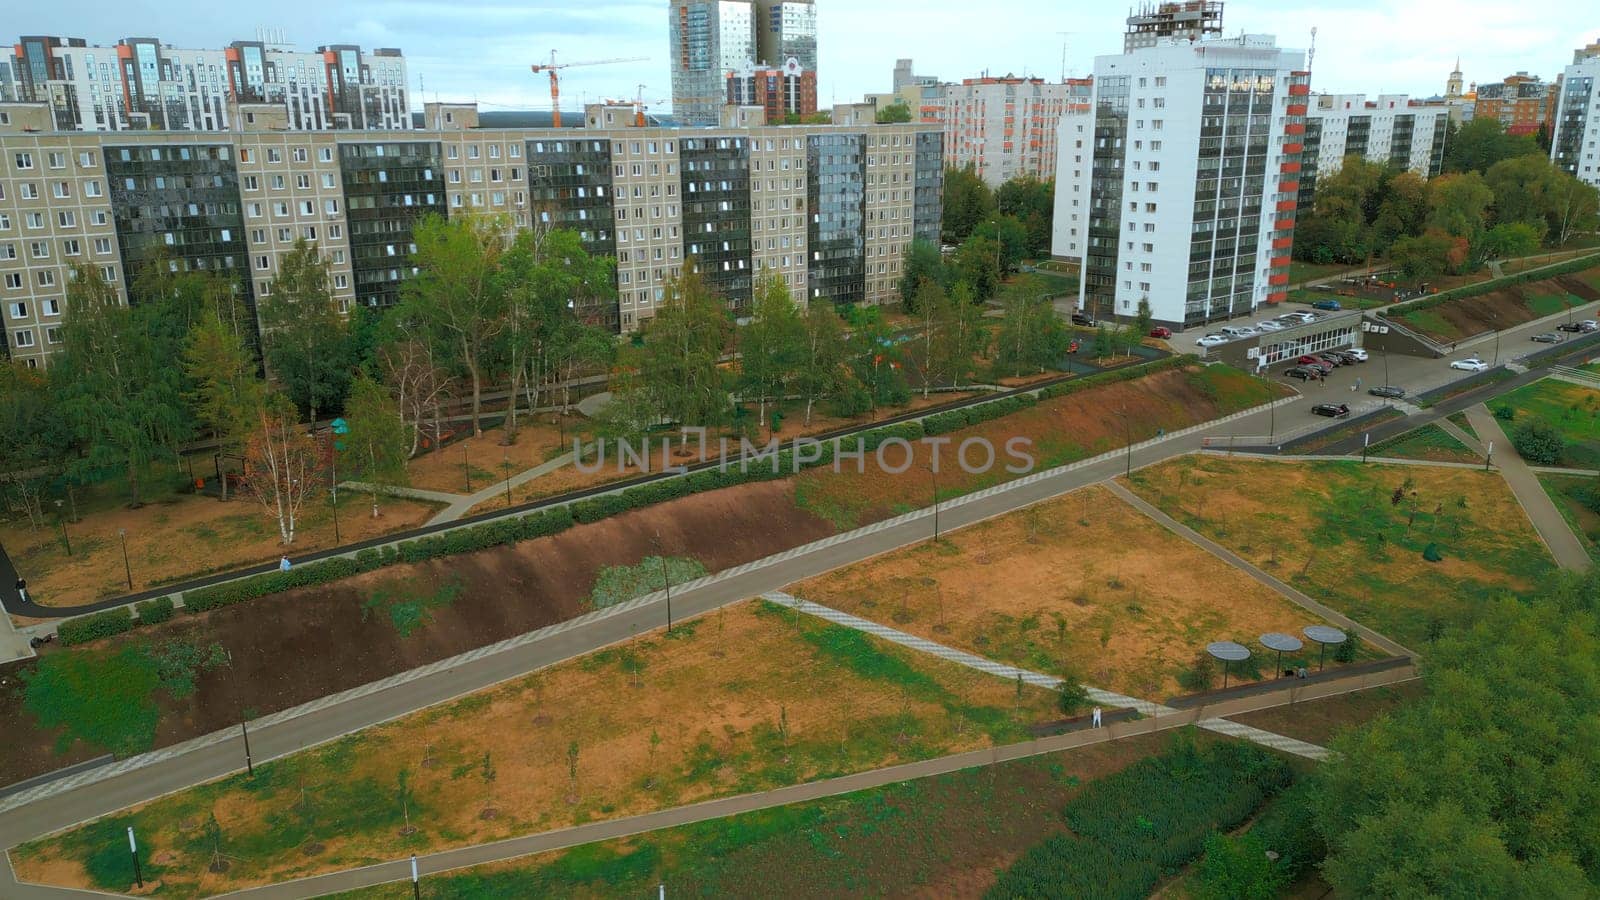 Top view of park alley in residential area of city. Clip. View of city with residential buildings and park alley. Beautiful landscape of park alley in urban landscape with buildings by Mediawhalestock